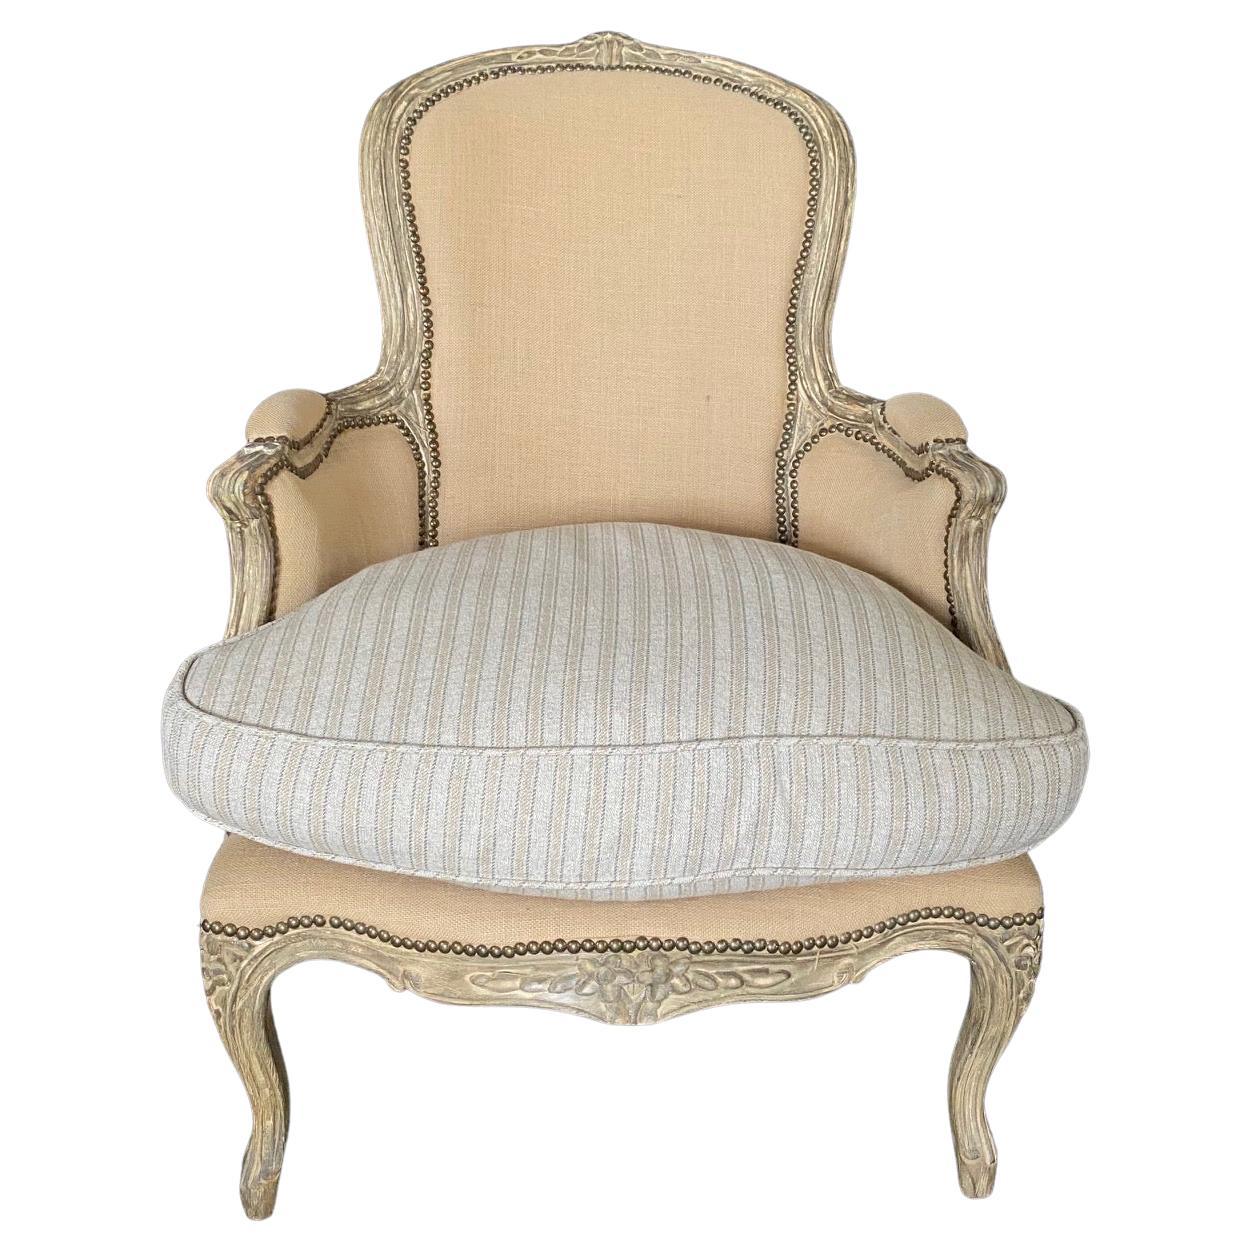 Stunning Louis XV Style Bergere Armchair with Neutral Contrasting Seat Cushion